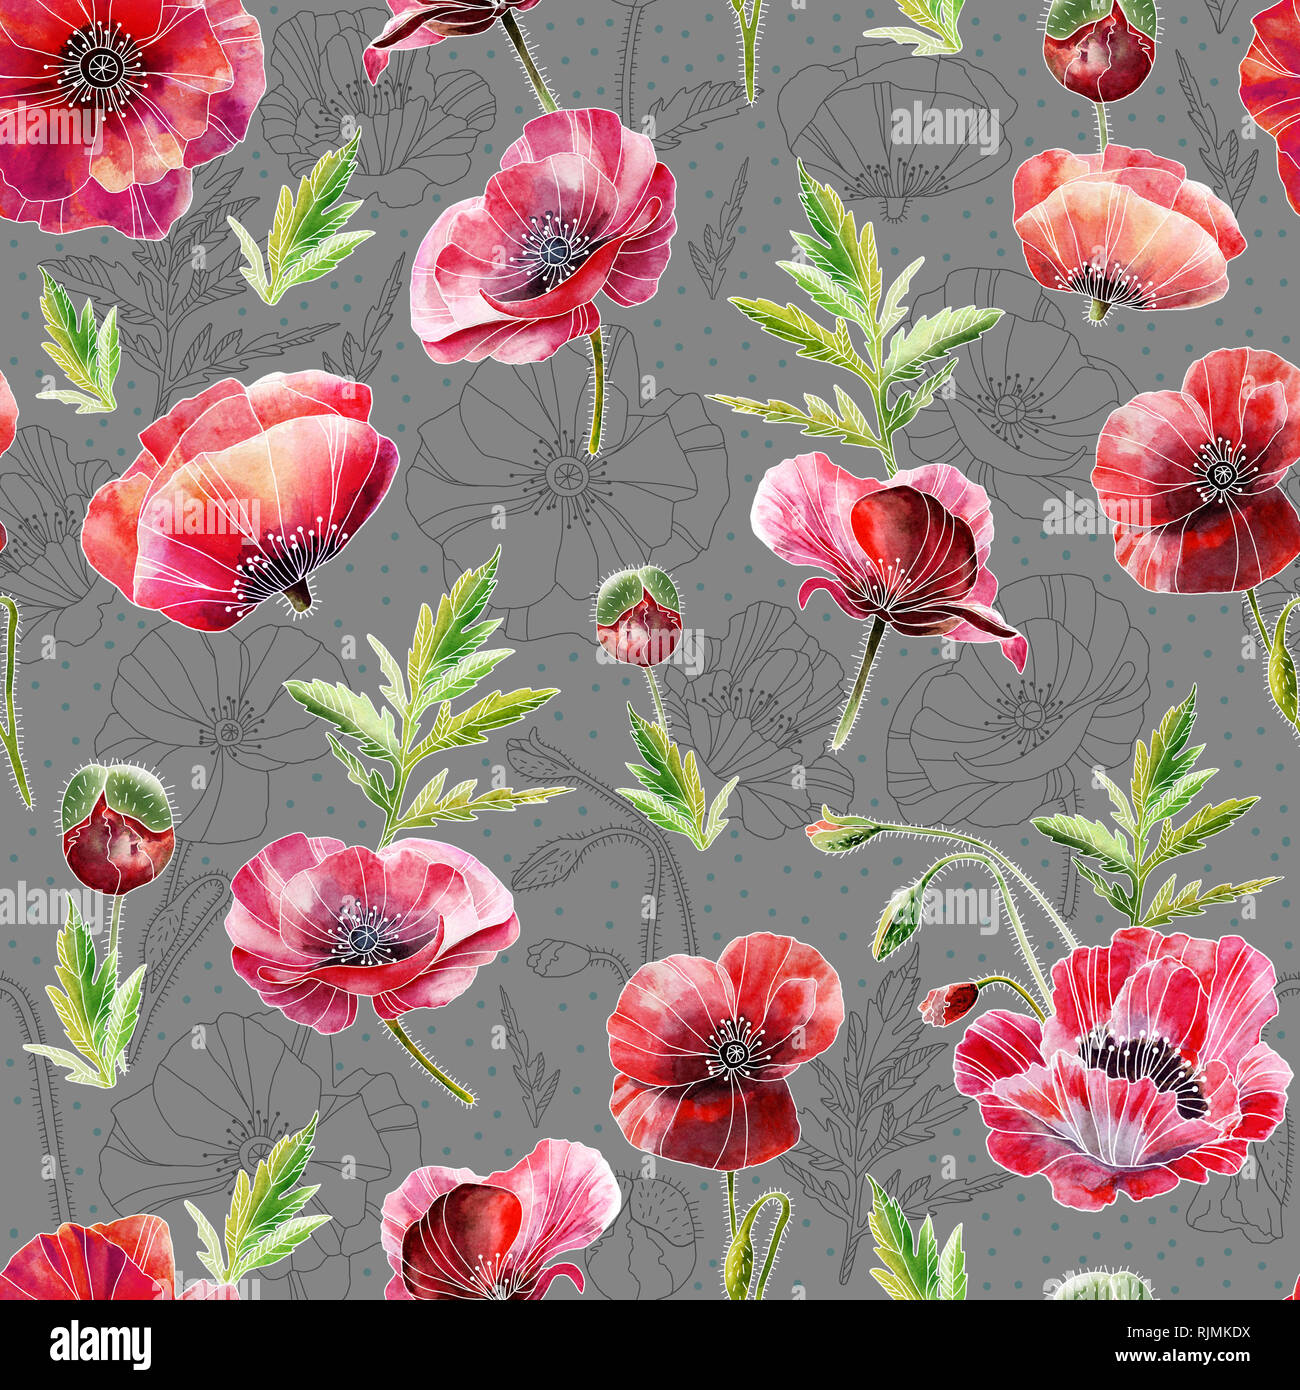 A seamless pattern design consisting of poppy flowers, hand-drawn in watercolor. Realistic painting. Design for wallpaper, textile or wrapping paper.  Stock Photo